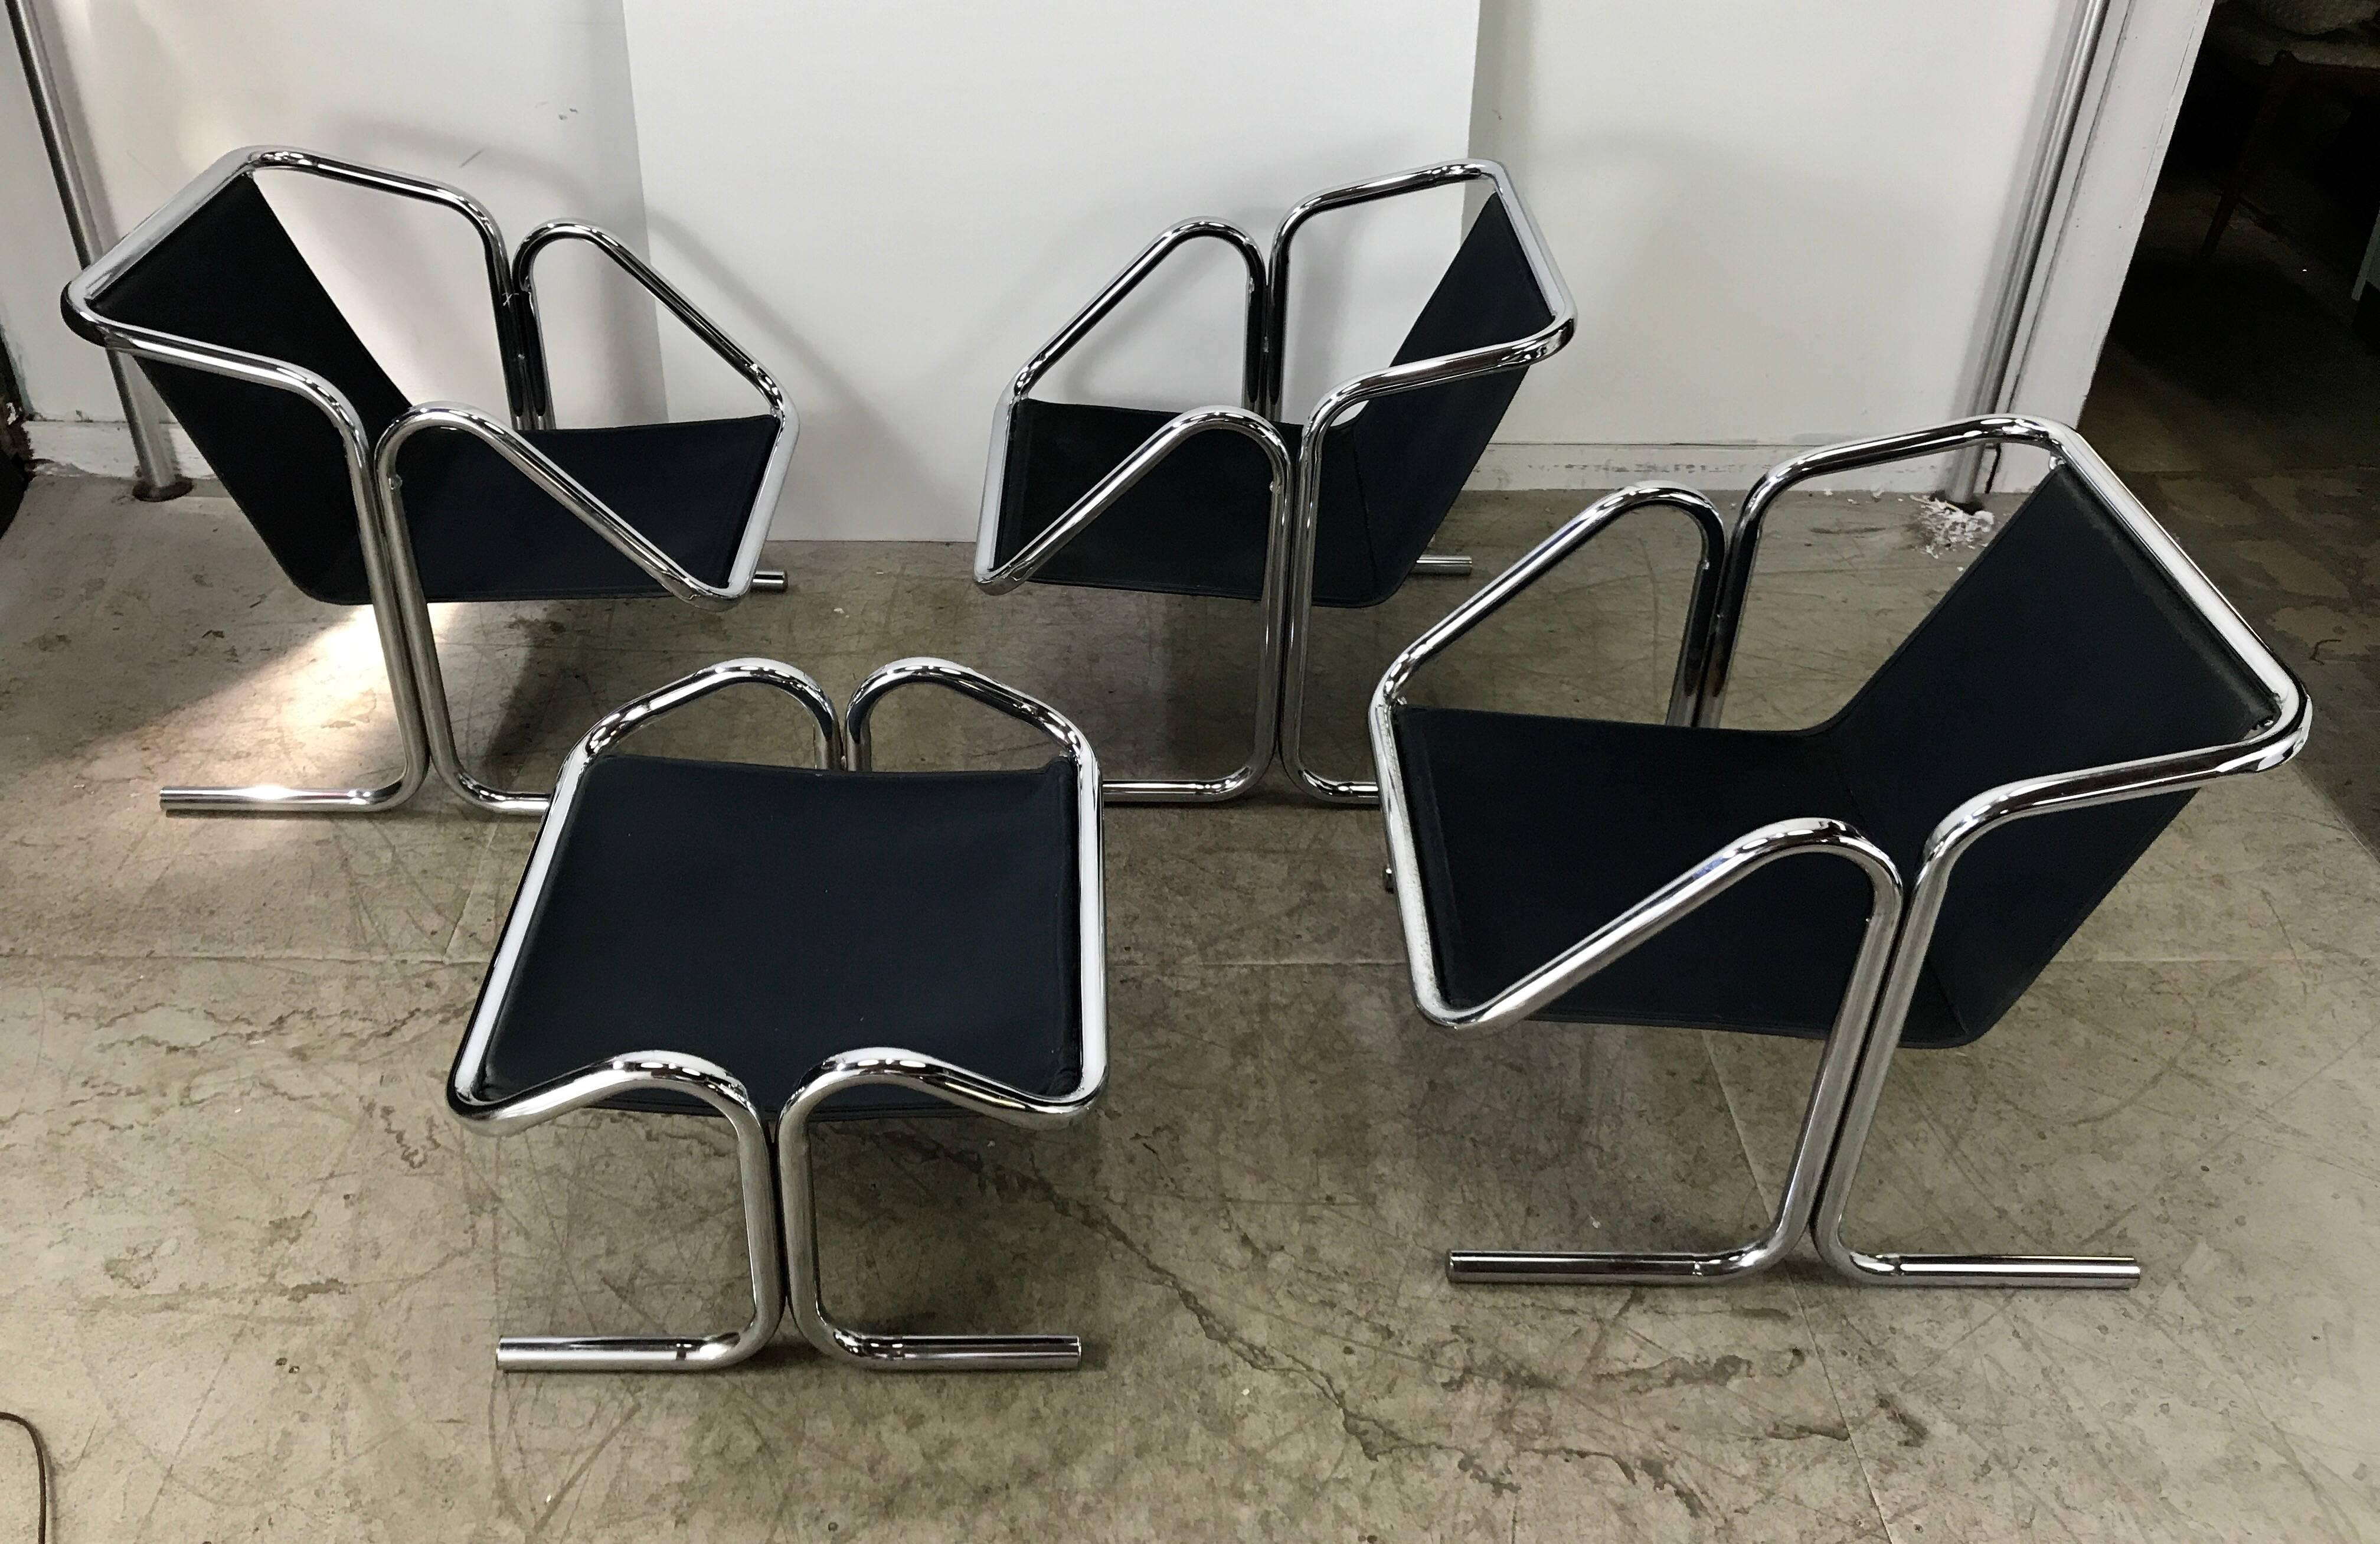 A set of Jerry Johnson Arcadia for Landes Manufacturing Company lounge chairs with chrome frames and black canvas slings. Each chair is made from two bent chrome tubes fused together, Classic 1960s pop modernist seating, Designed by Jerry Johnson